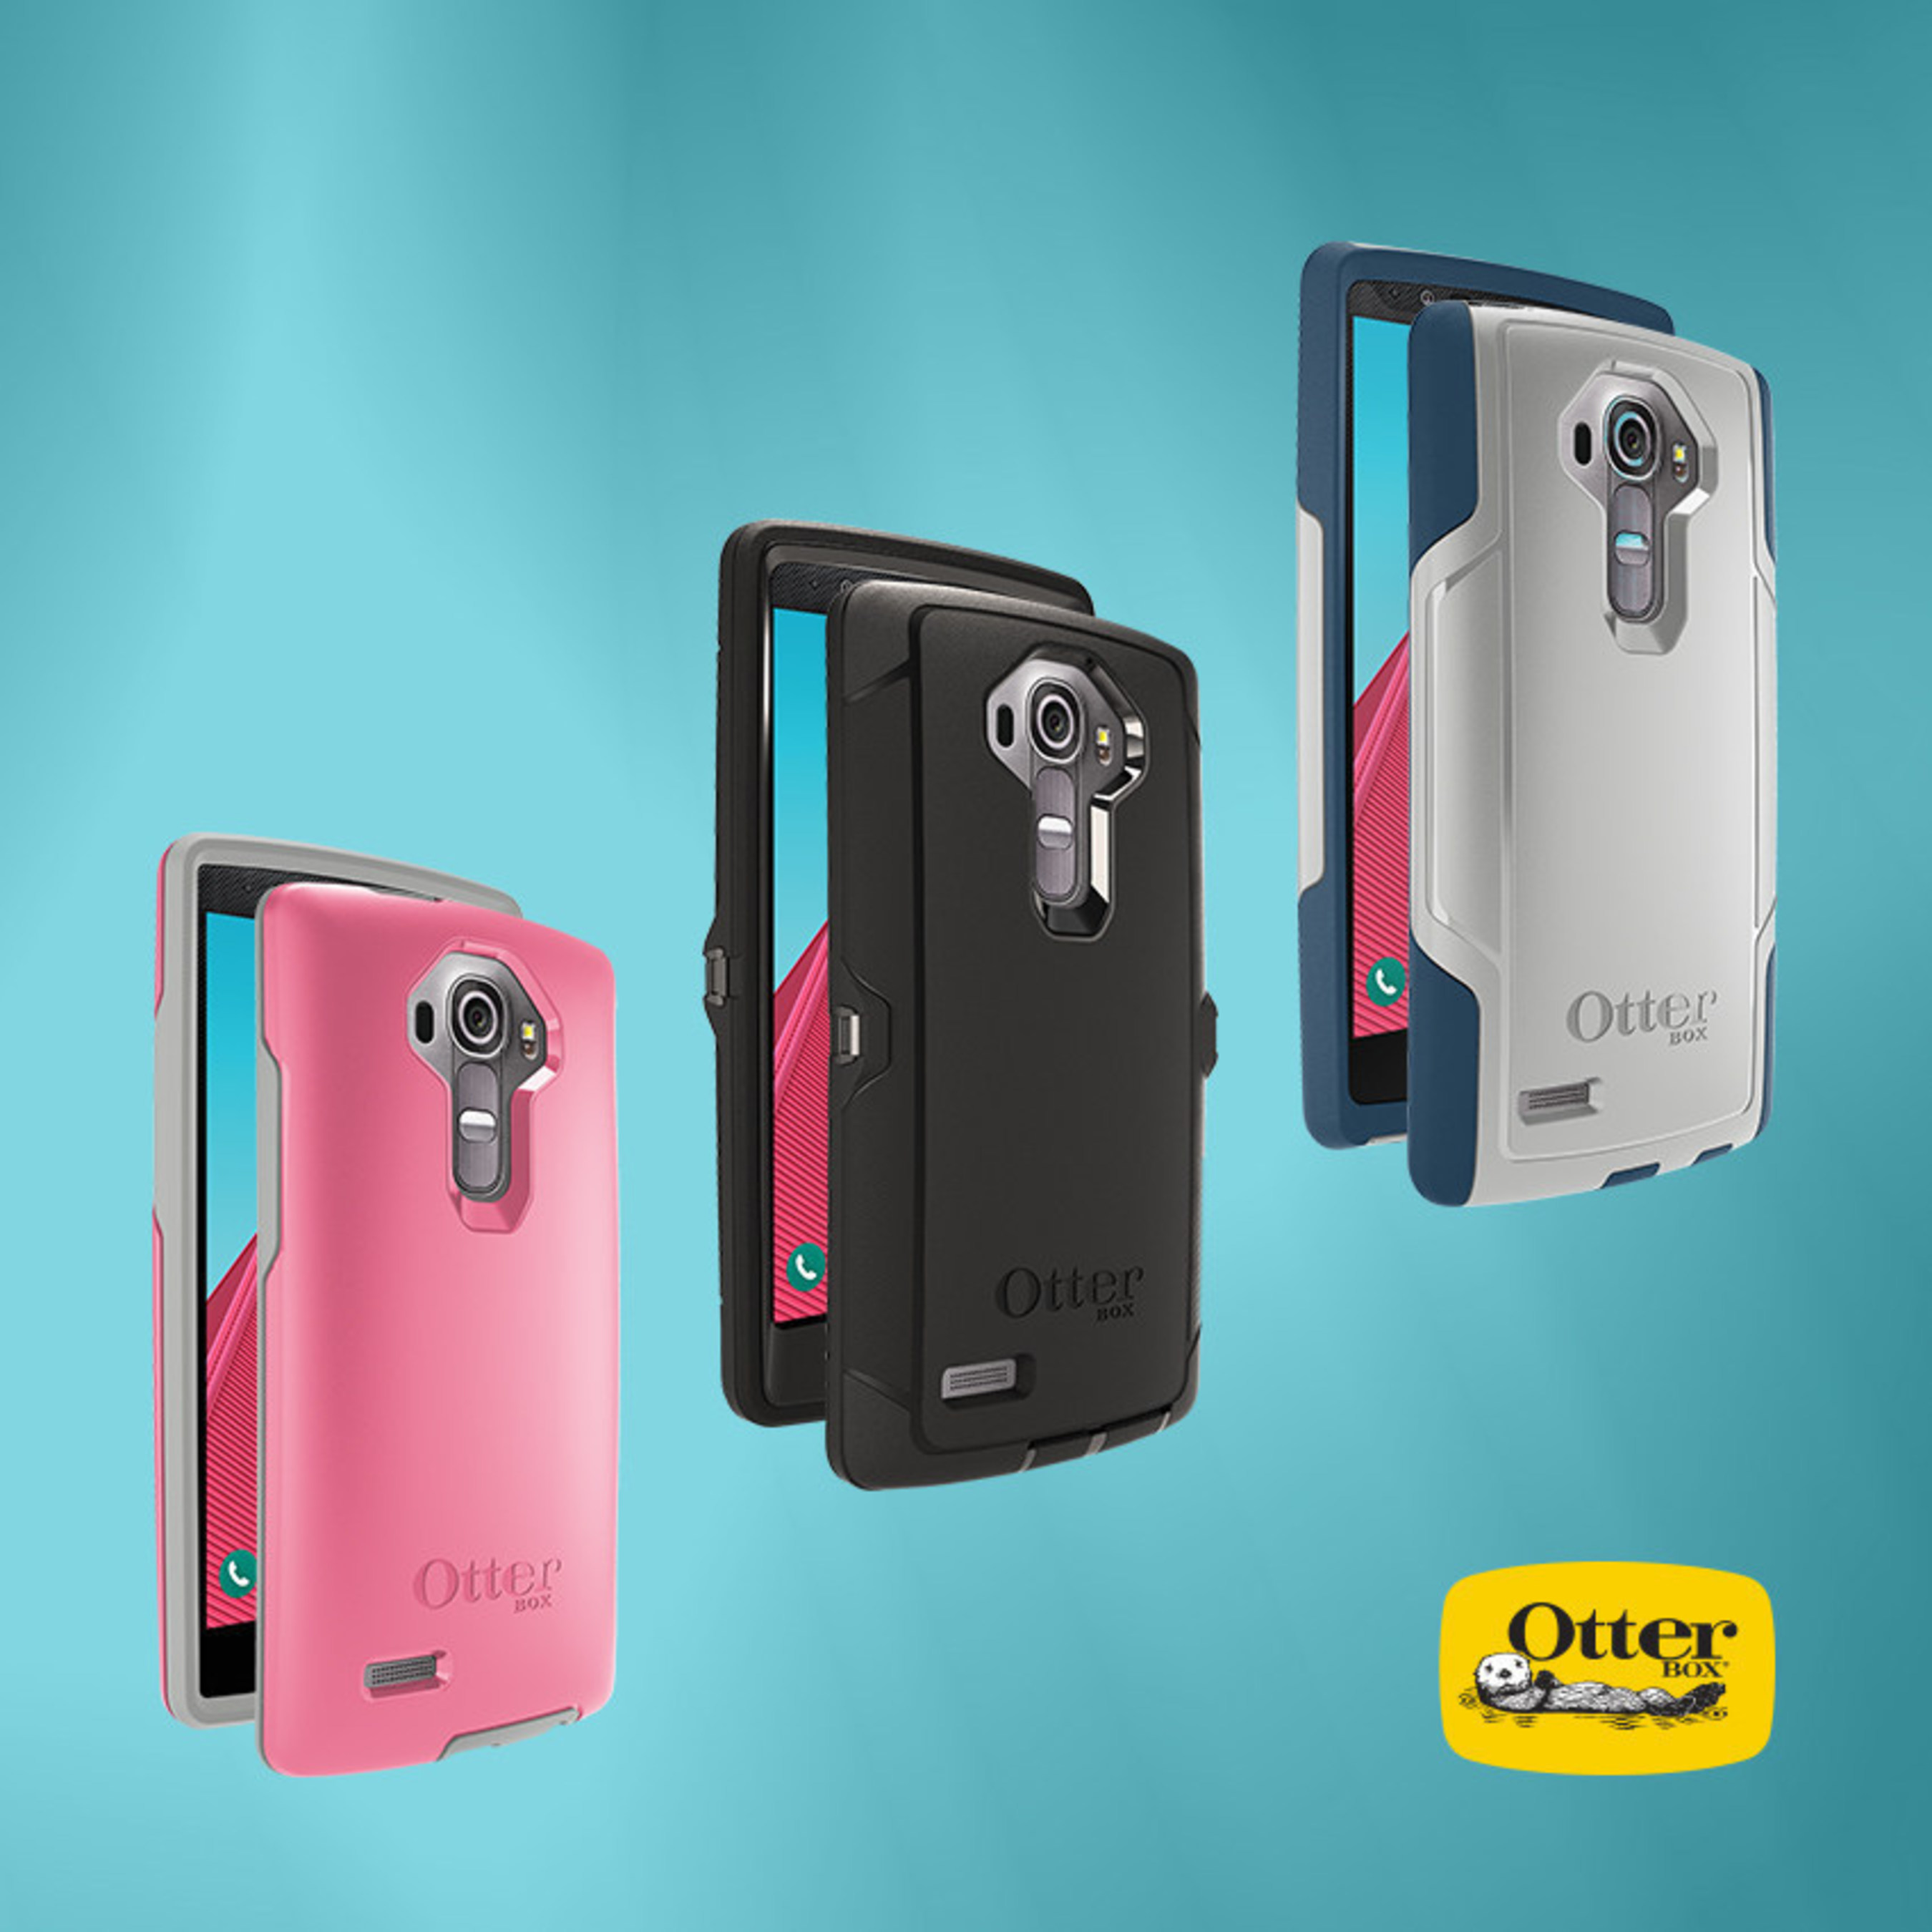 OtterBox makes the case for LG G4, available now on otterbox.com.